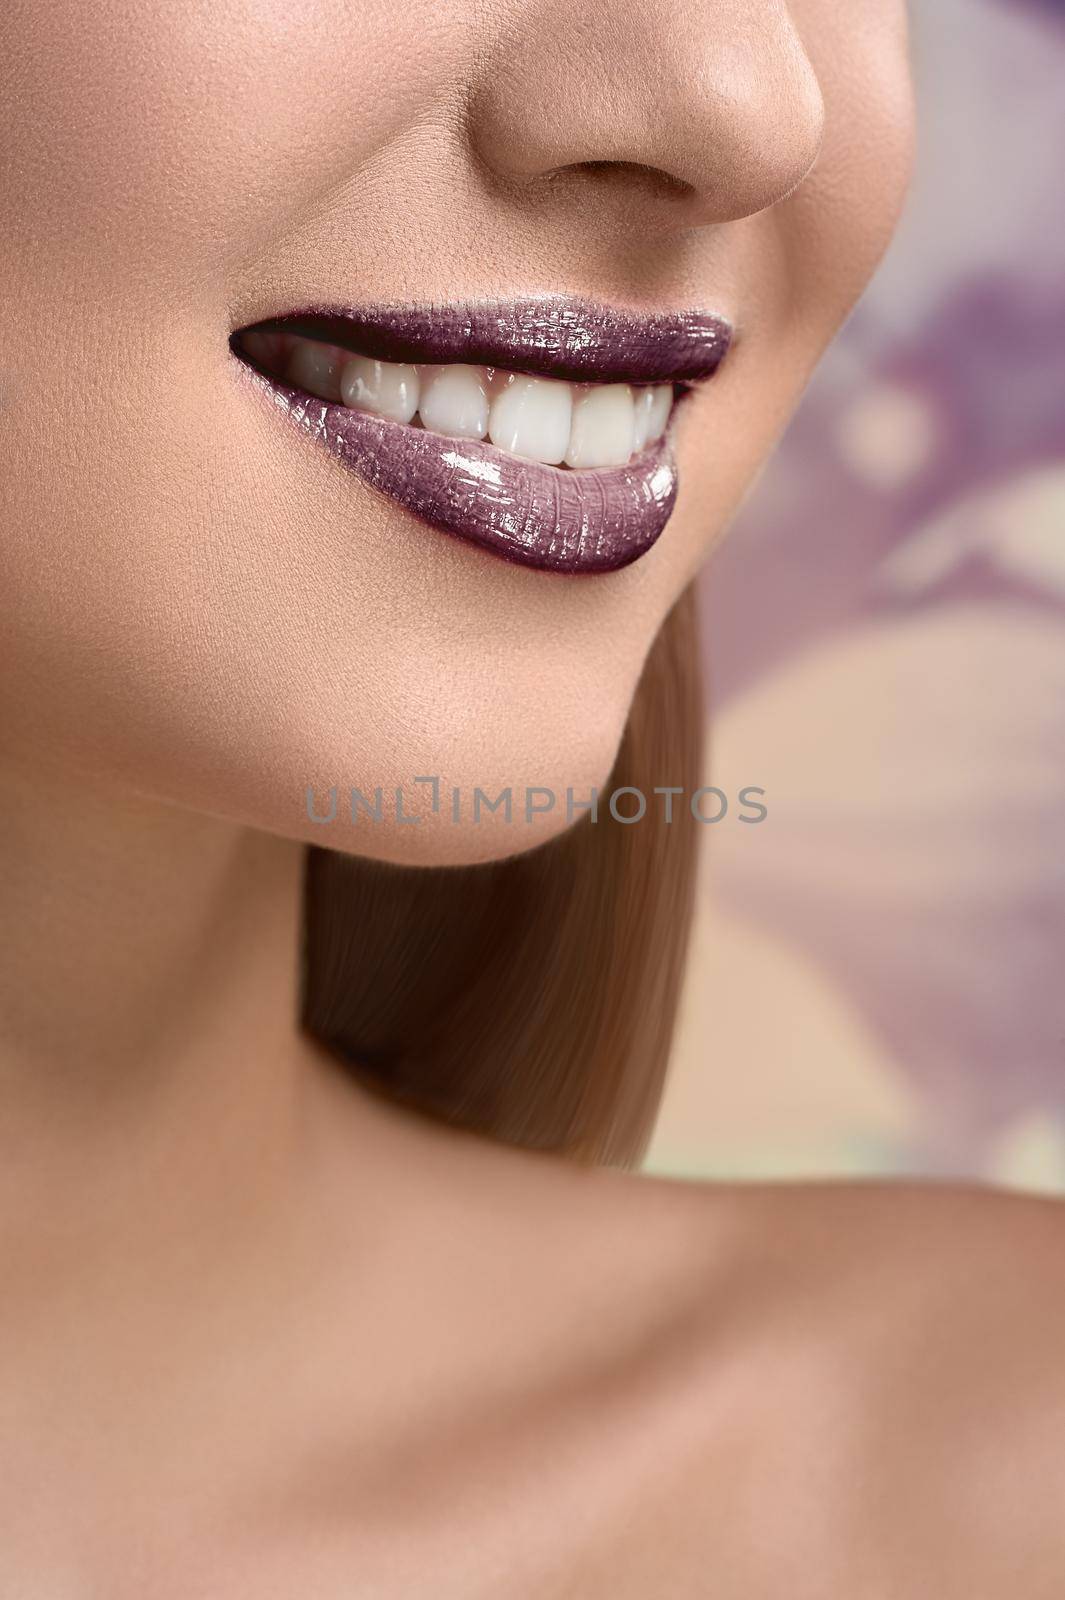 Beautiful glossy lips. Vertical close up of a woman with great healthy white teeth smiling mouth open lips covered in plum lip gloss copyspace beauty cosmetics dentistry whitening bleaching concept